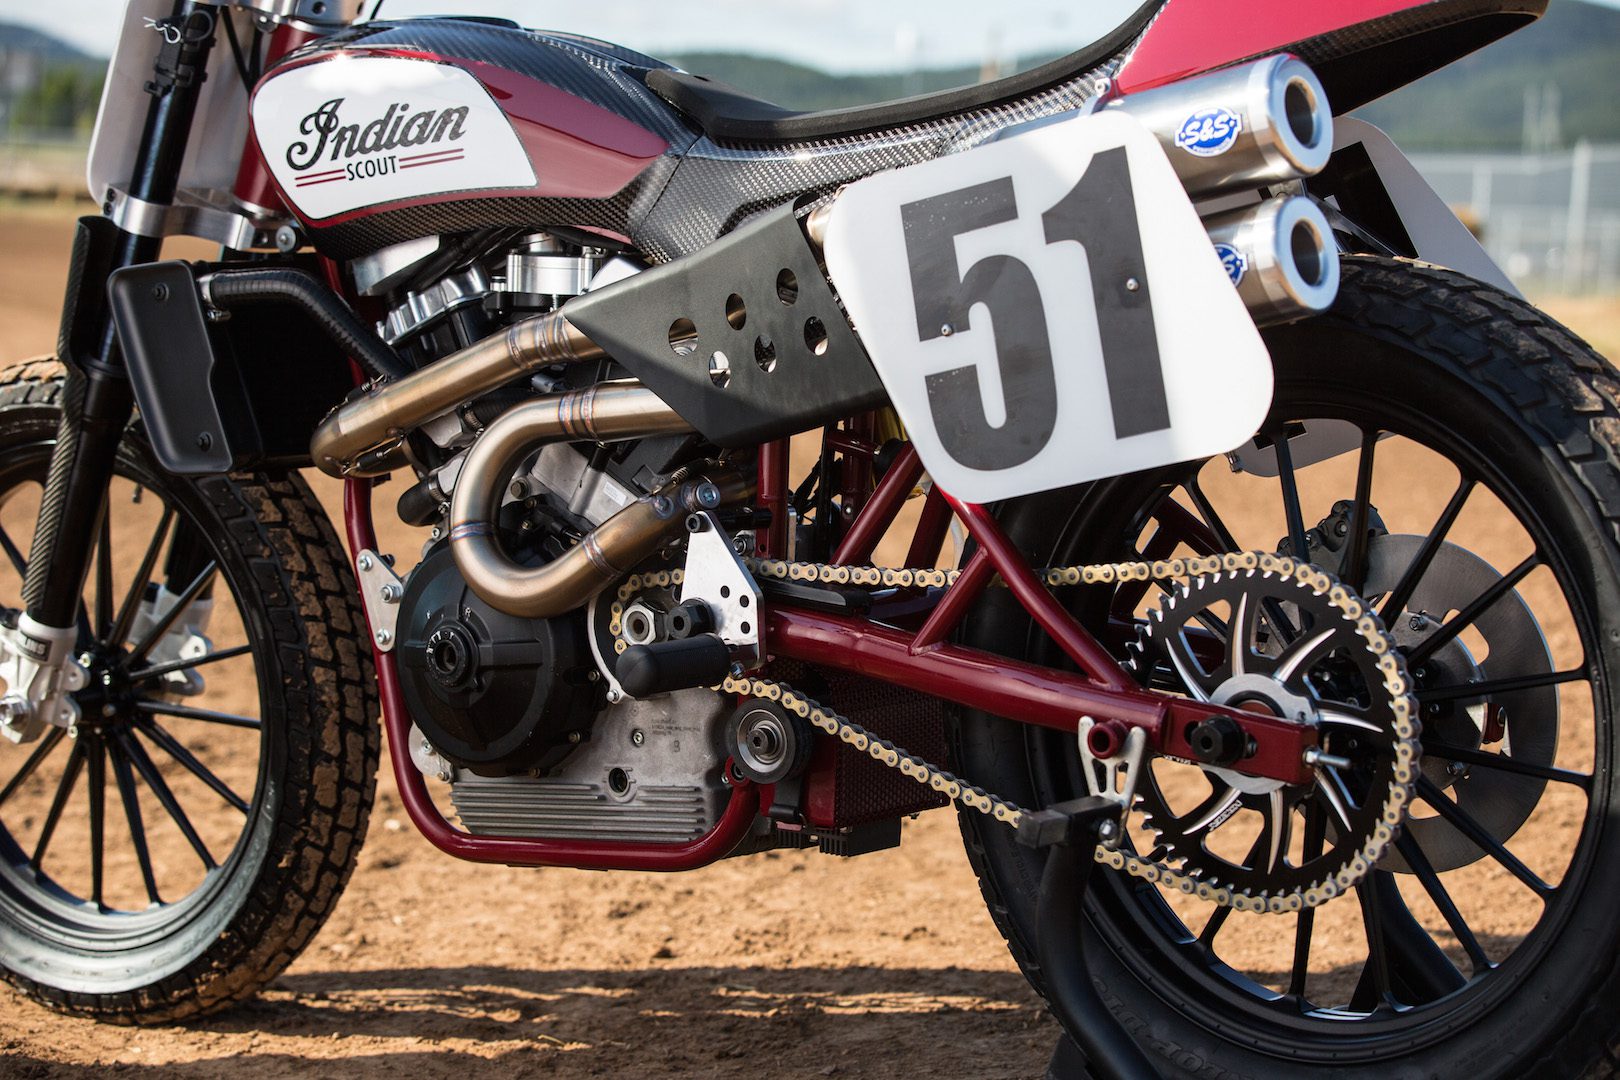 The all-new Indian Scout FTR750 flat track race bike. war